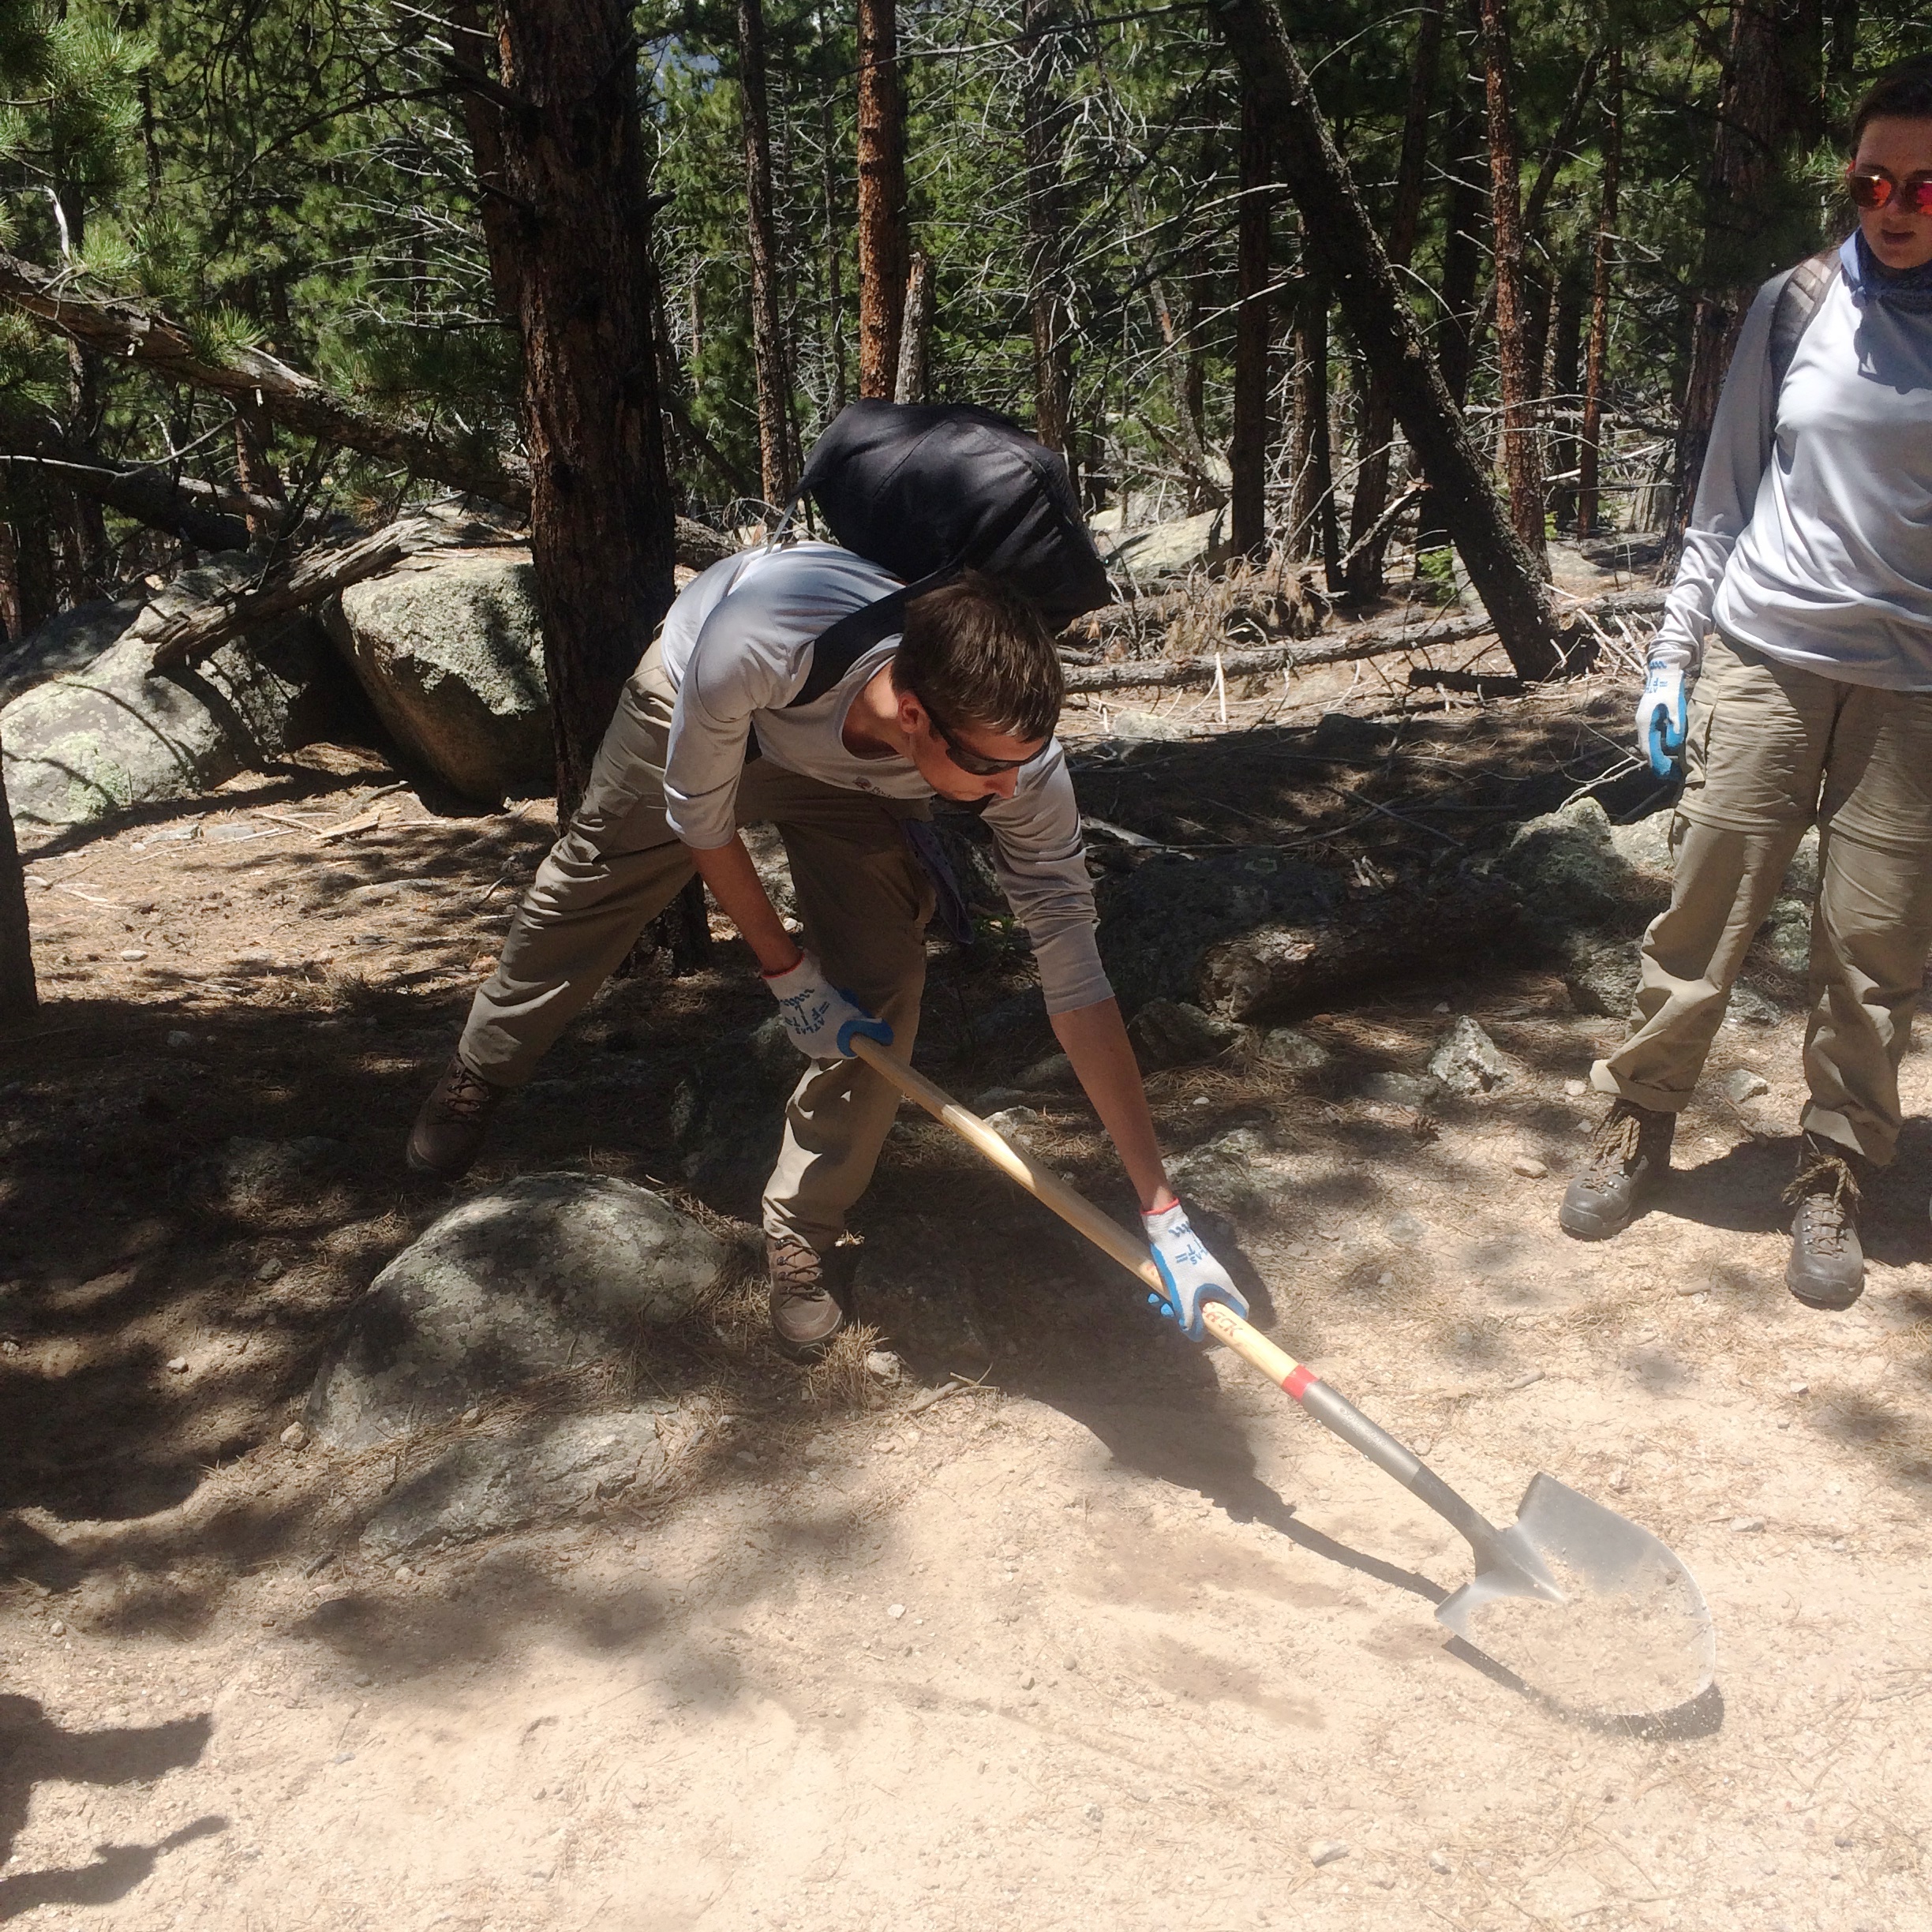 RMC-CC crew member, Galen demonstrates how to dig and maintain drainages on trails. 